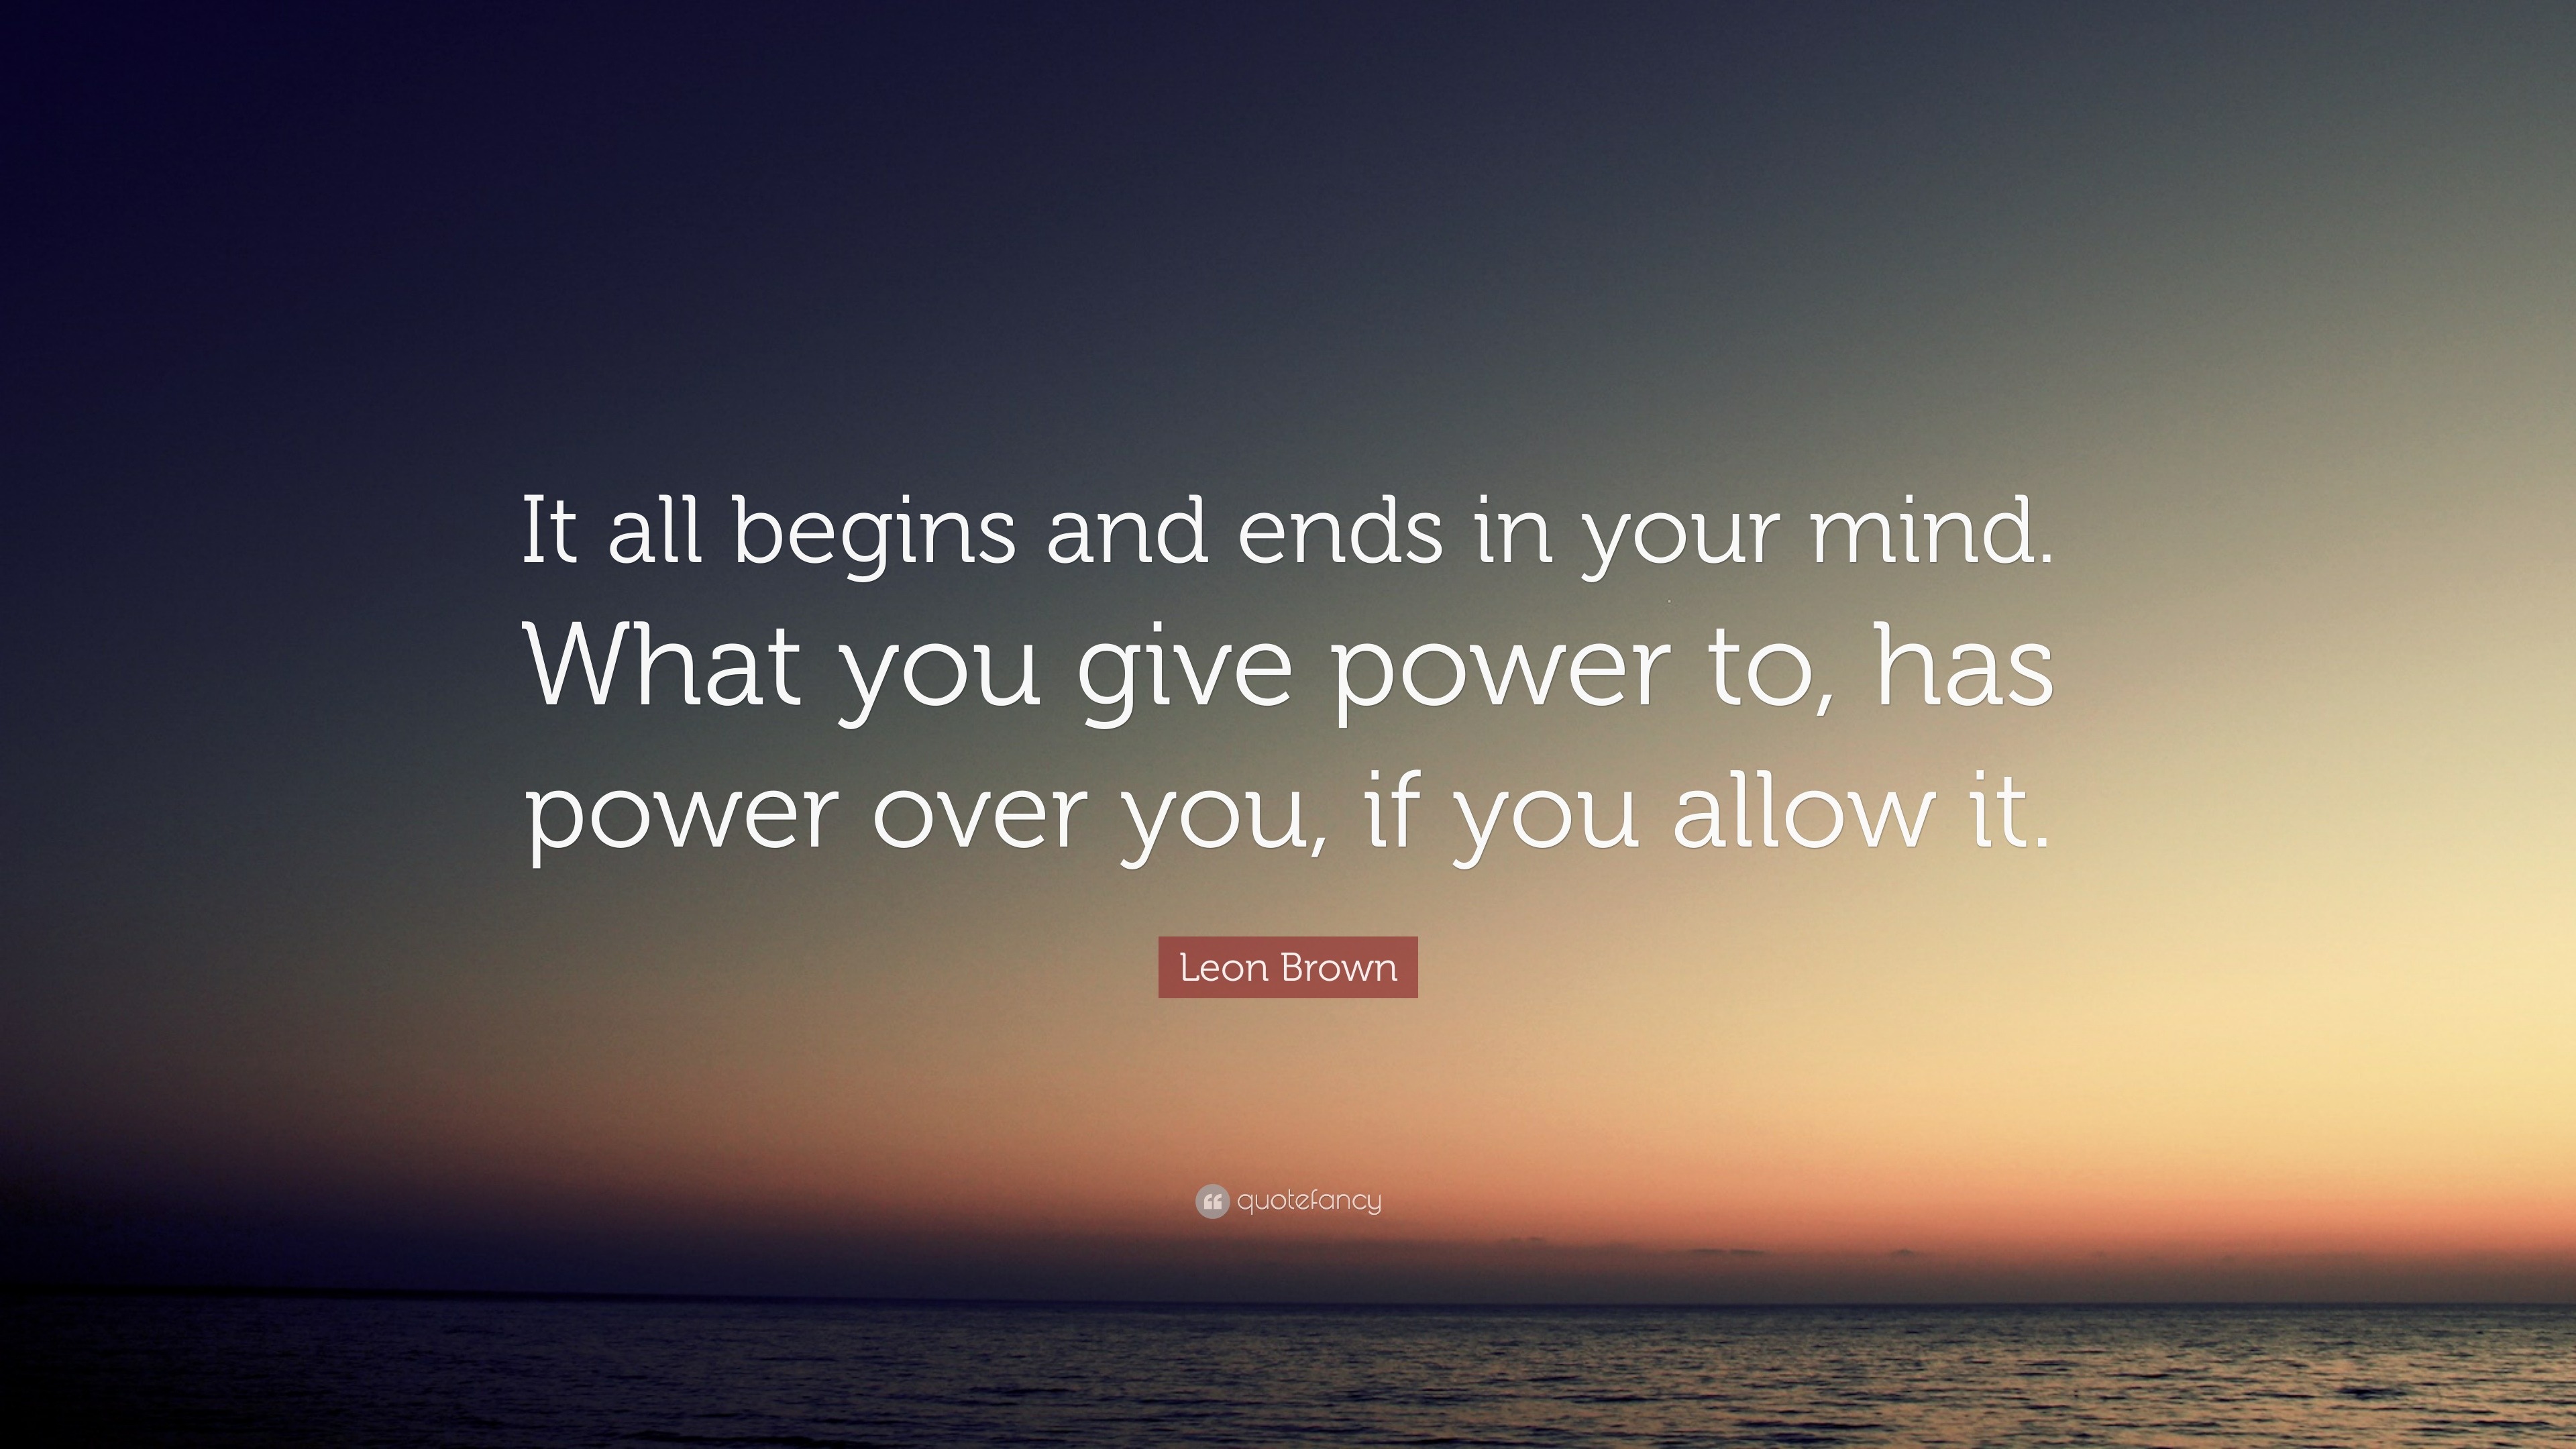 Leon Brown Quote: “It all begins and ends in your mind. What you give